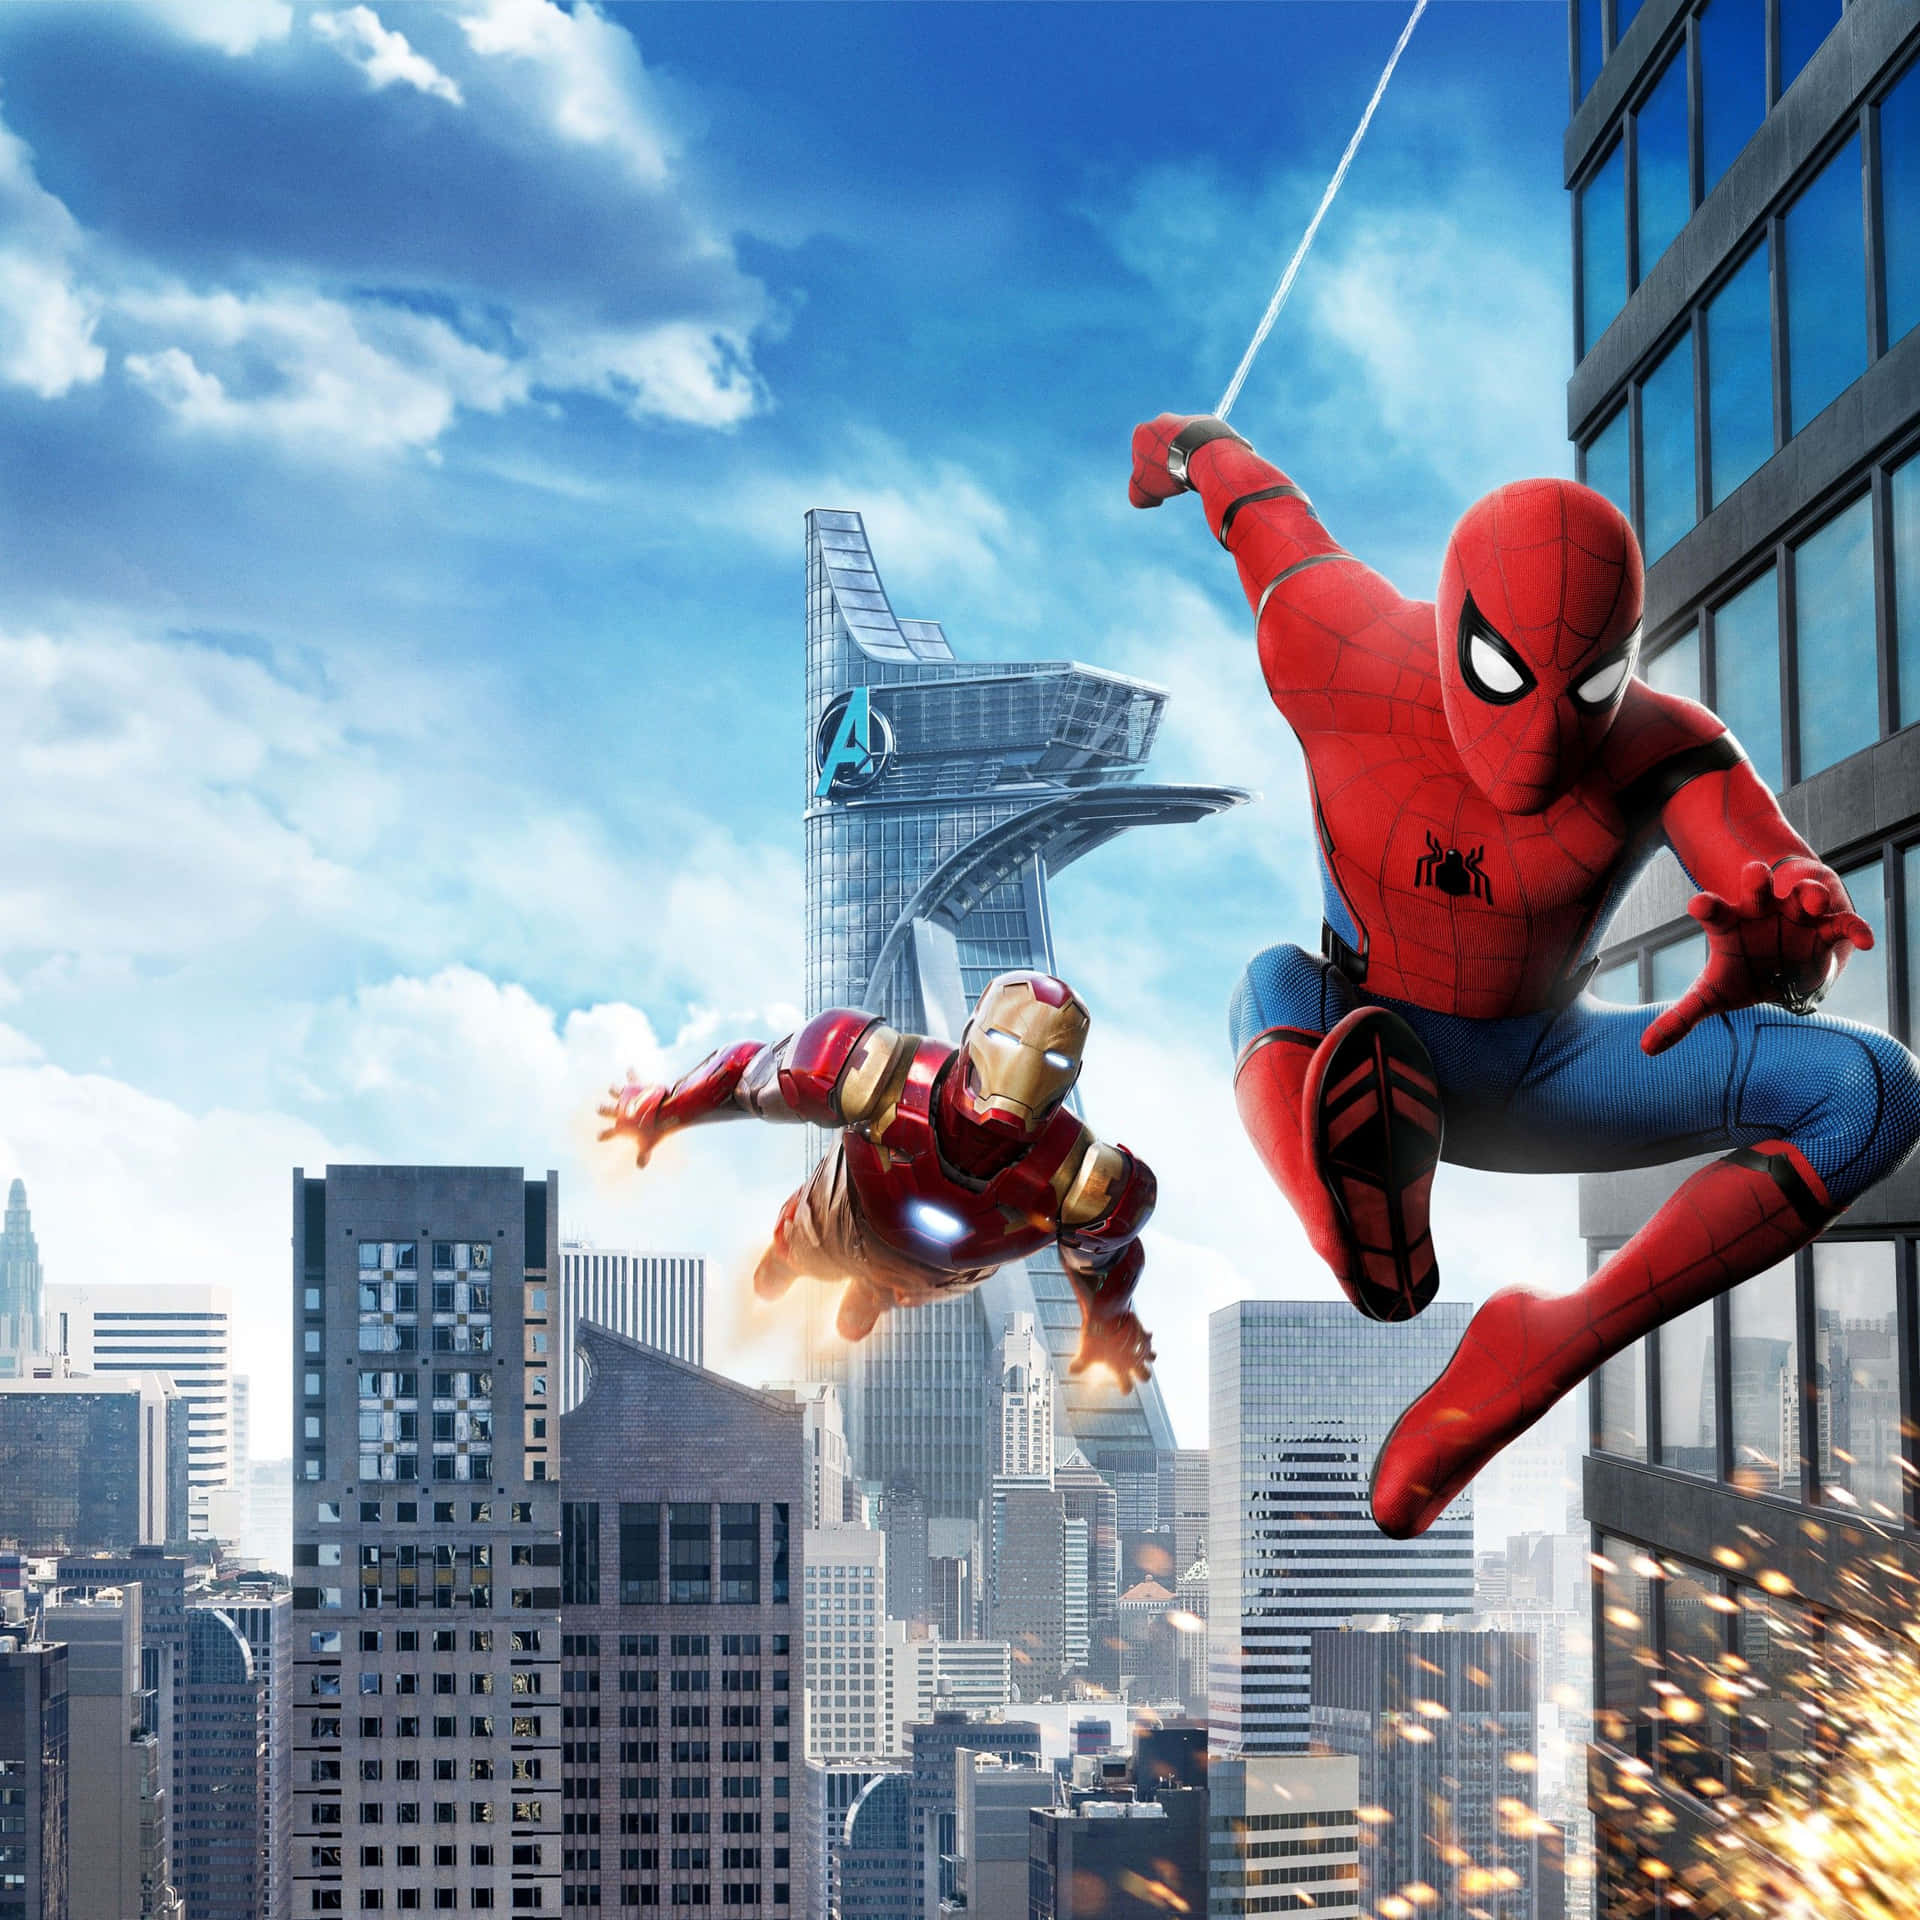 “Two Marvel Superheroes Working Together” Wallpaper